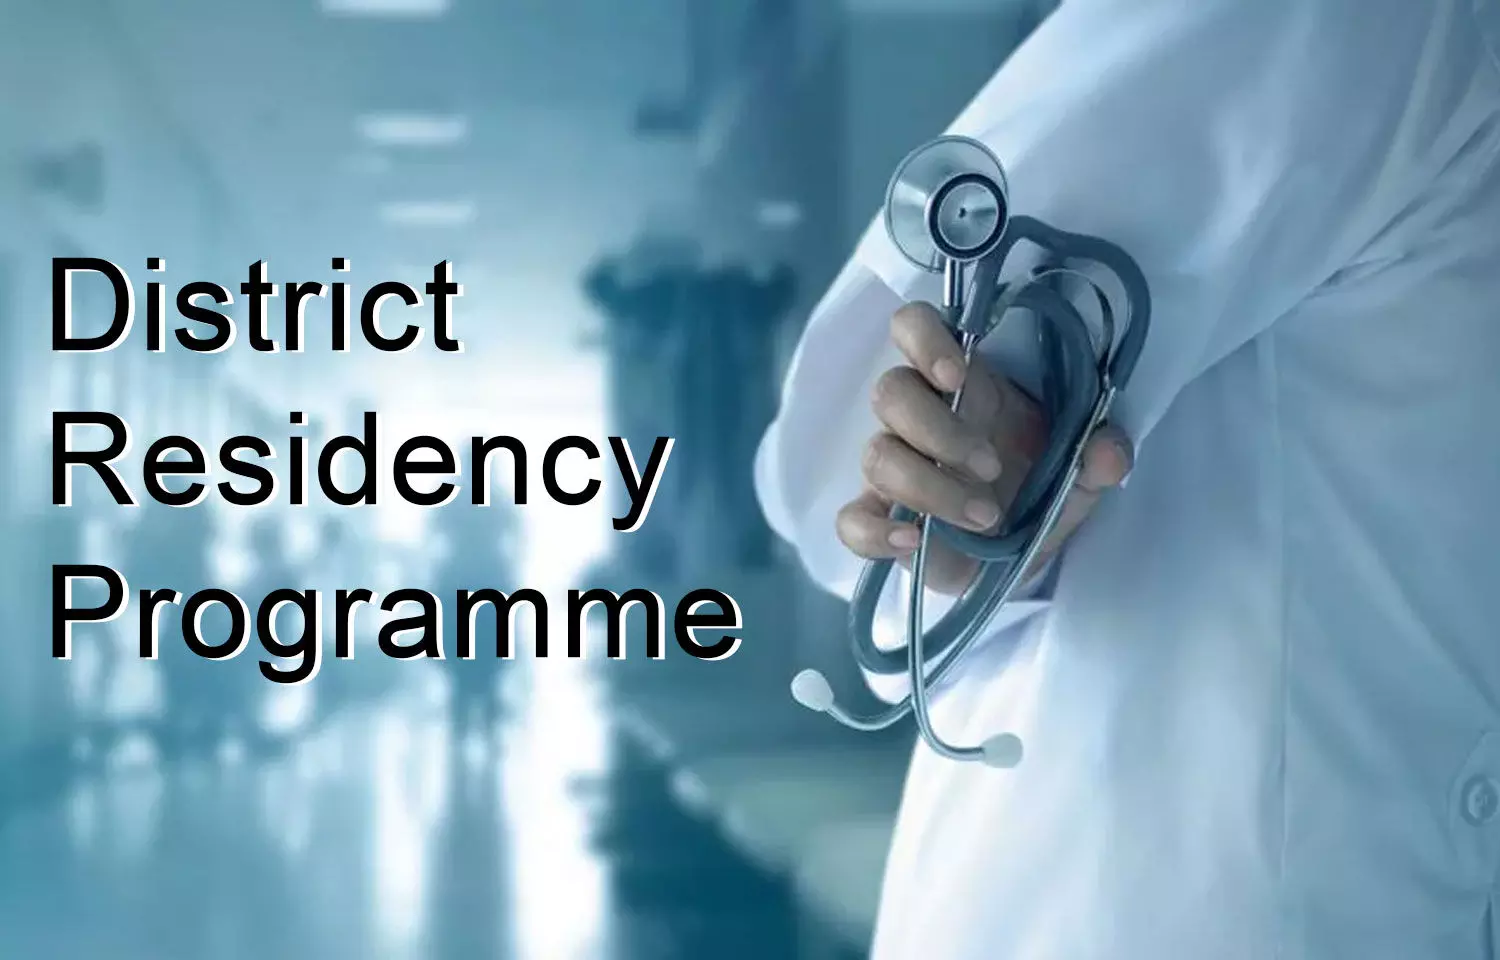 All MD, MS Medicos have to undergo Residency in district hospitals for 3 months: NMC mandates implementation